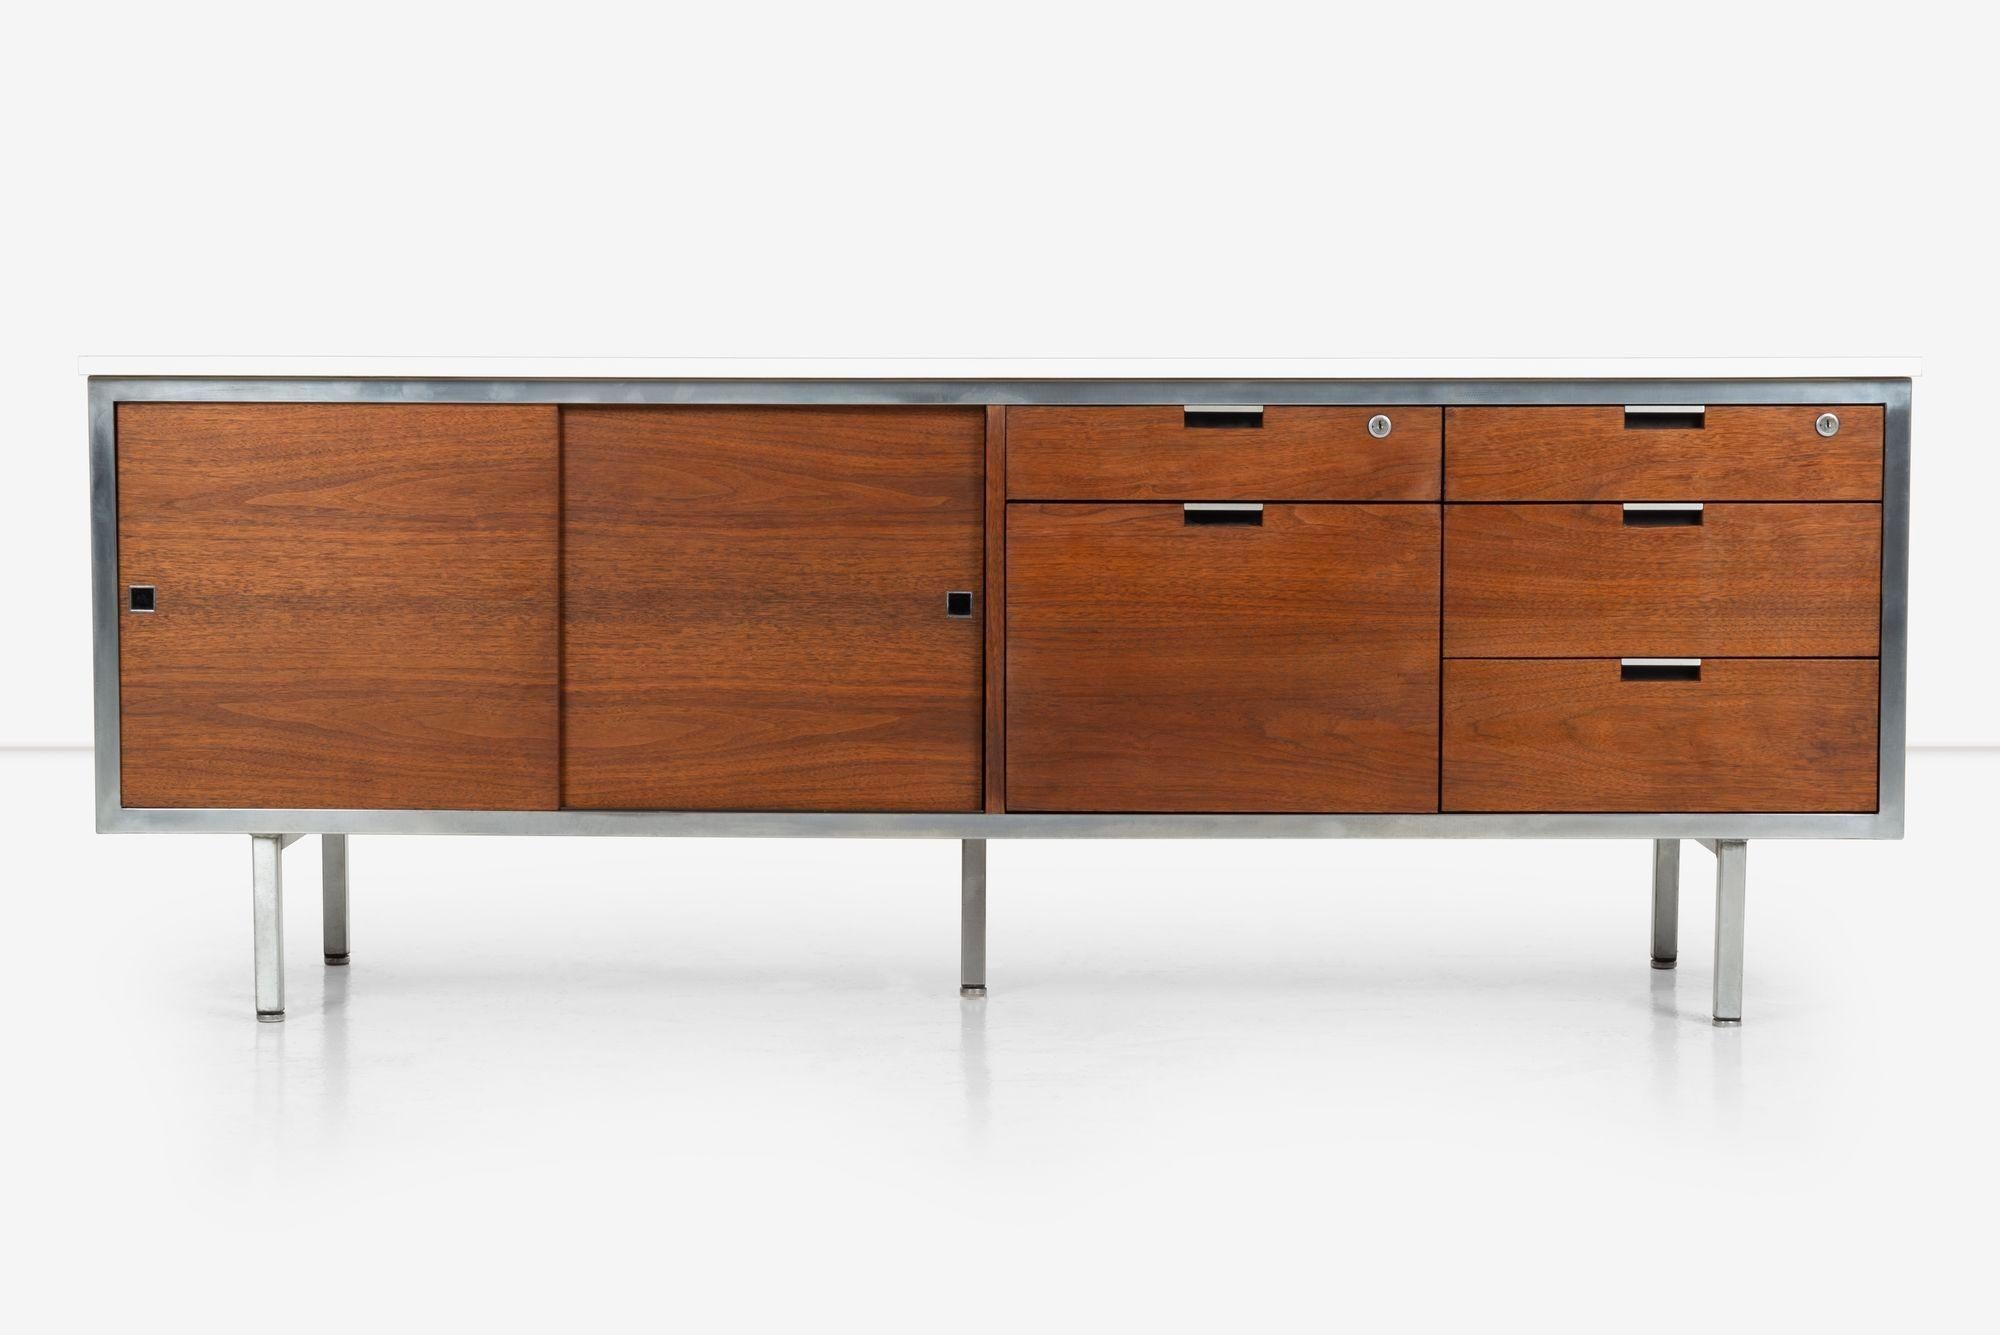 Robert John Credenza, five drawers 2 pencil drawers with locks, one file drawer with notch pulls, sliding doors with removable adjustable shelf.
Walnut veneer with white laminate top and steel legs.
(Lable inside drawer Robert John).